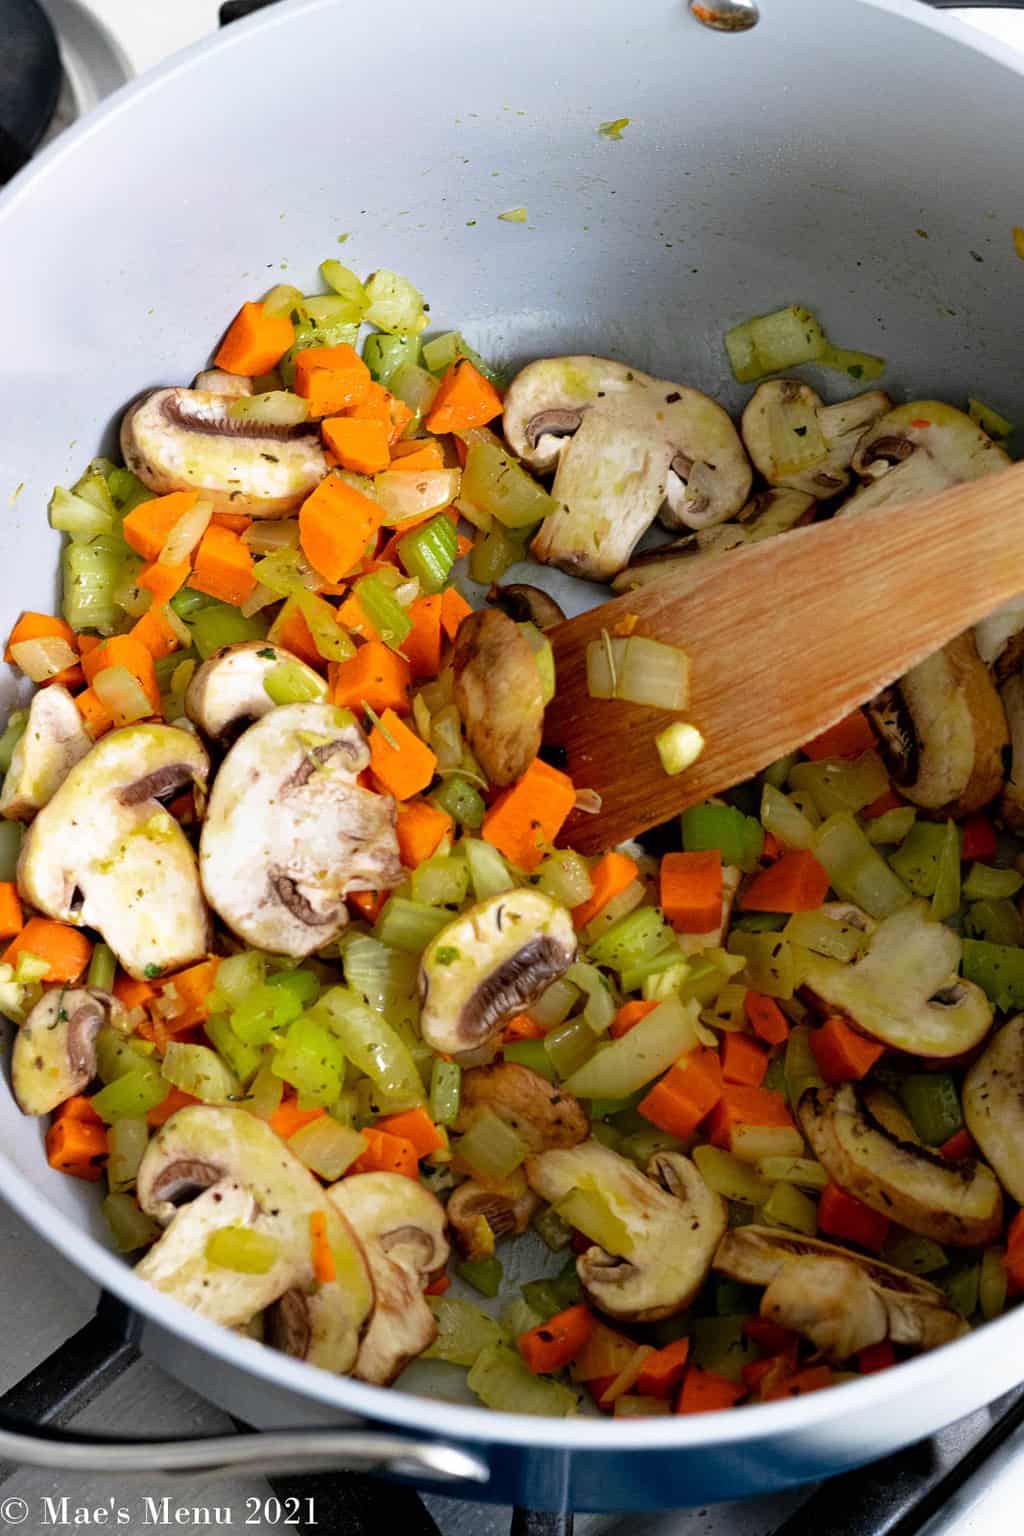 A saute pan of onions, carrots, celery, mushrooms, and herbs